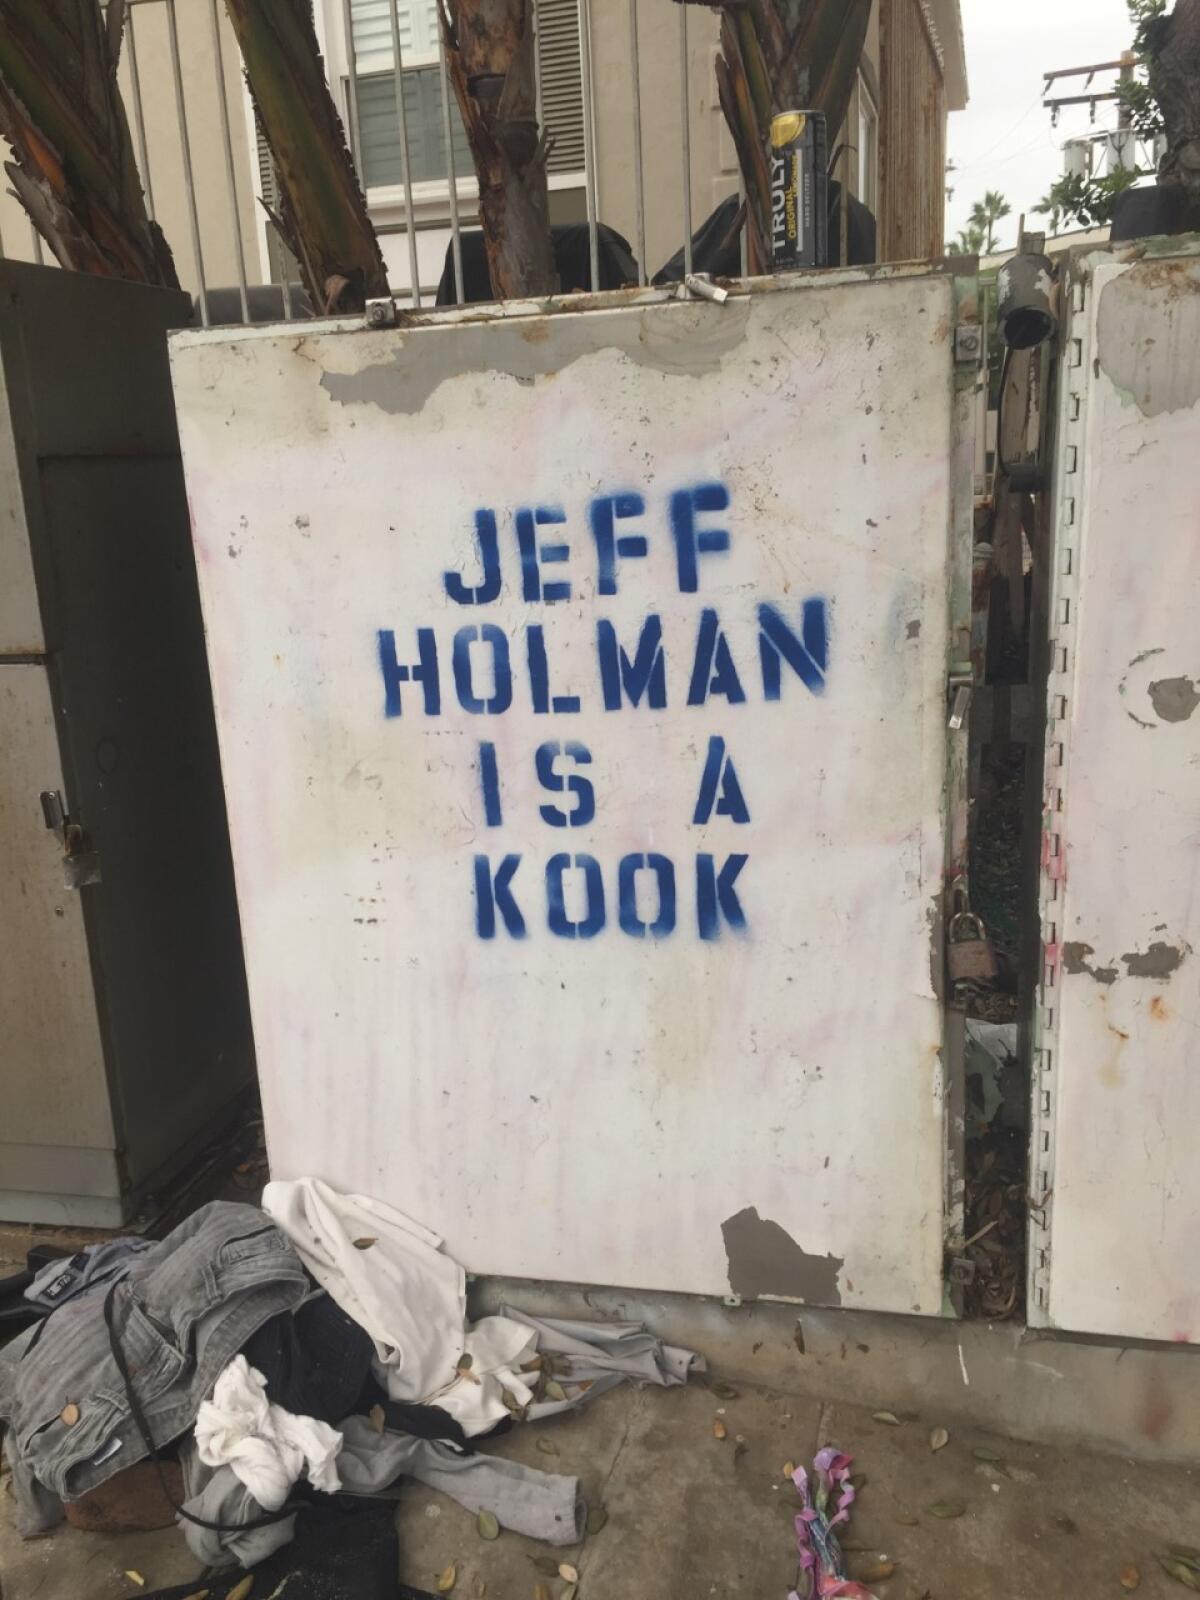 A tagger made a stencil to paint this utility box message attacking a resident who had reported graffiti to city officials.